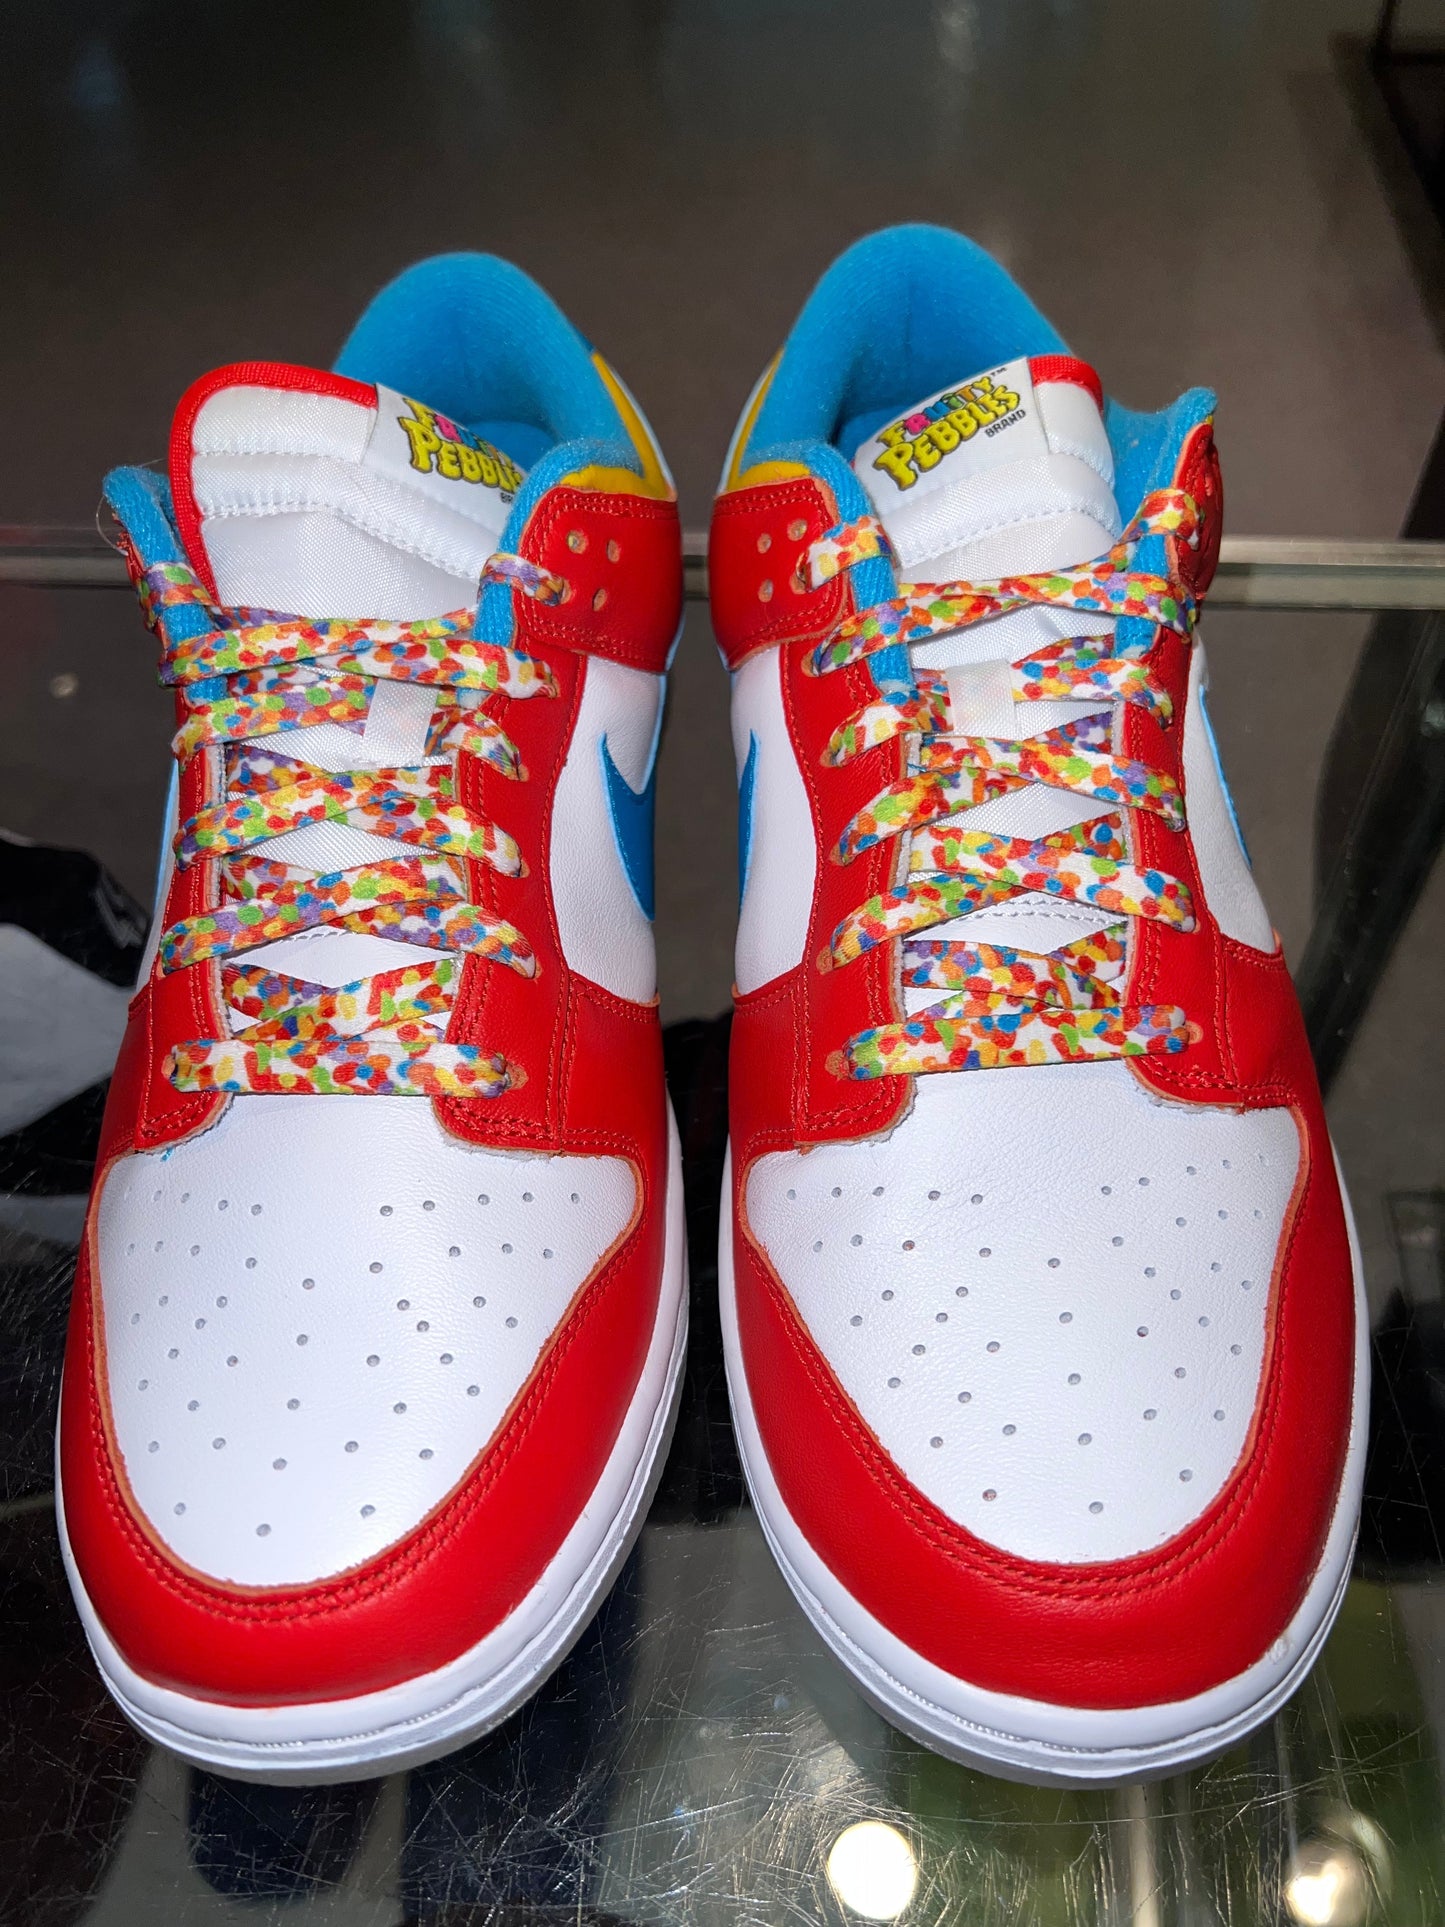 Size 8 Dunk Low “Fruity Pebble” Brand New (Mall)